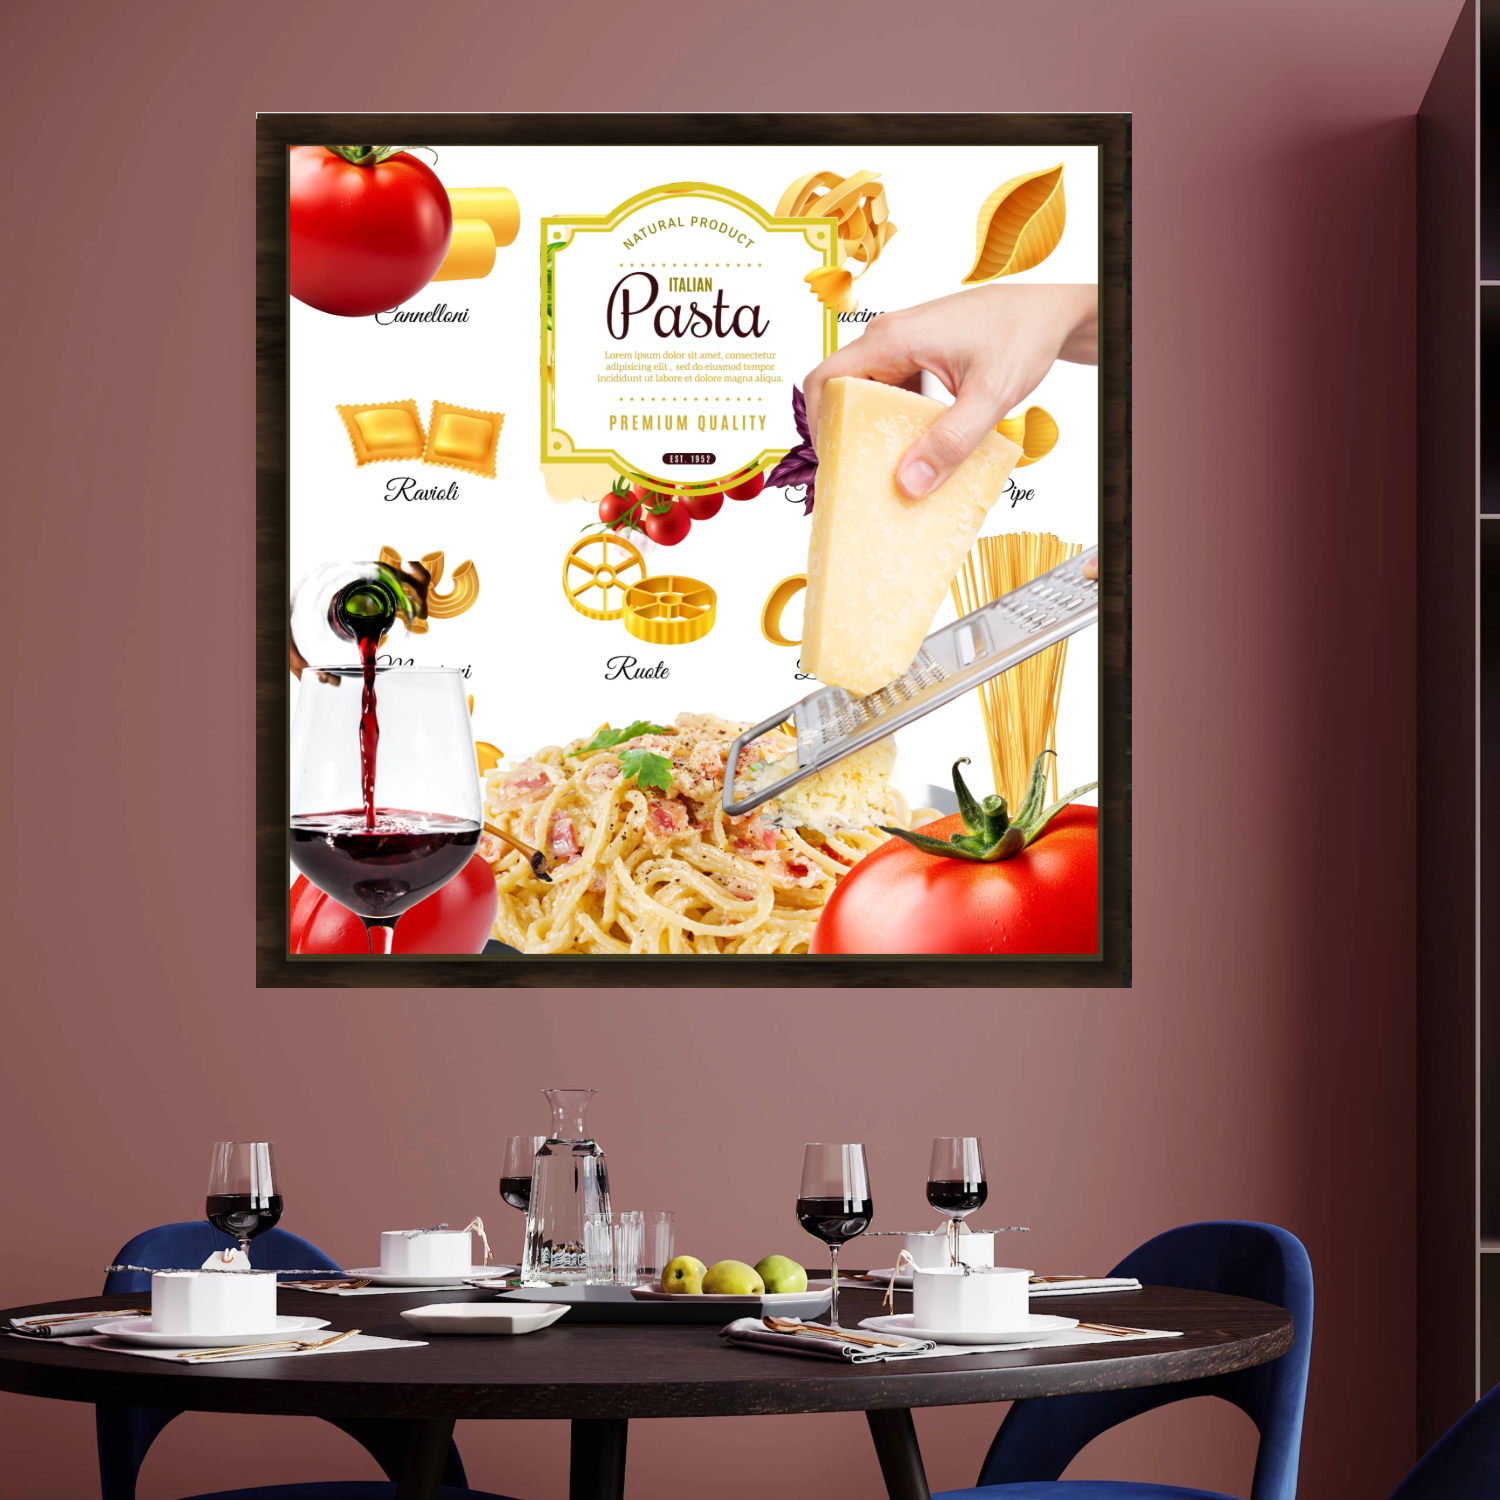 Wall Art PASTA Canvas Print Painting Original Giclee 32X32 + Frame  Italian Food Beauty Fun Design Fit Decor Kitchen Dining Room House Home Gift Ready Hang